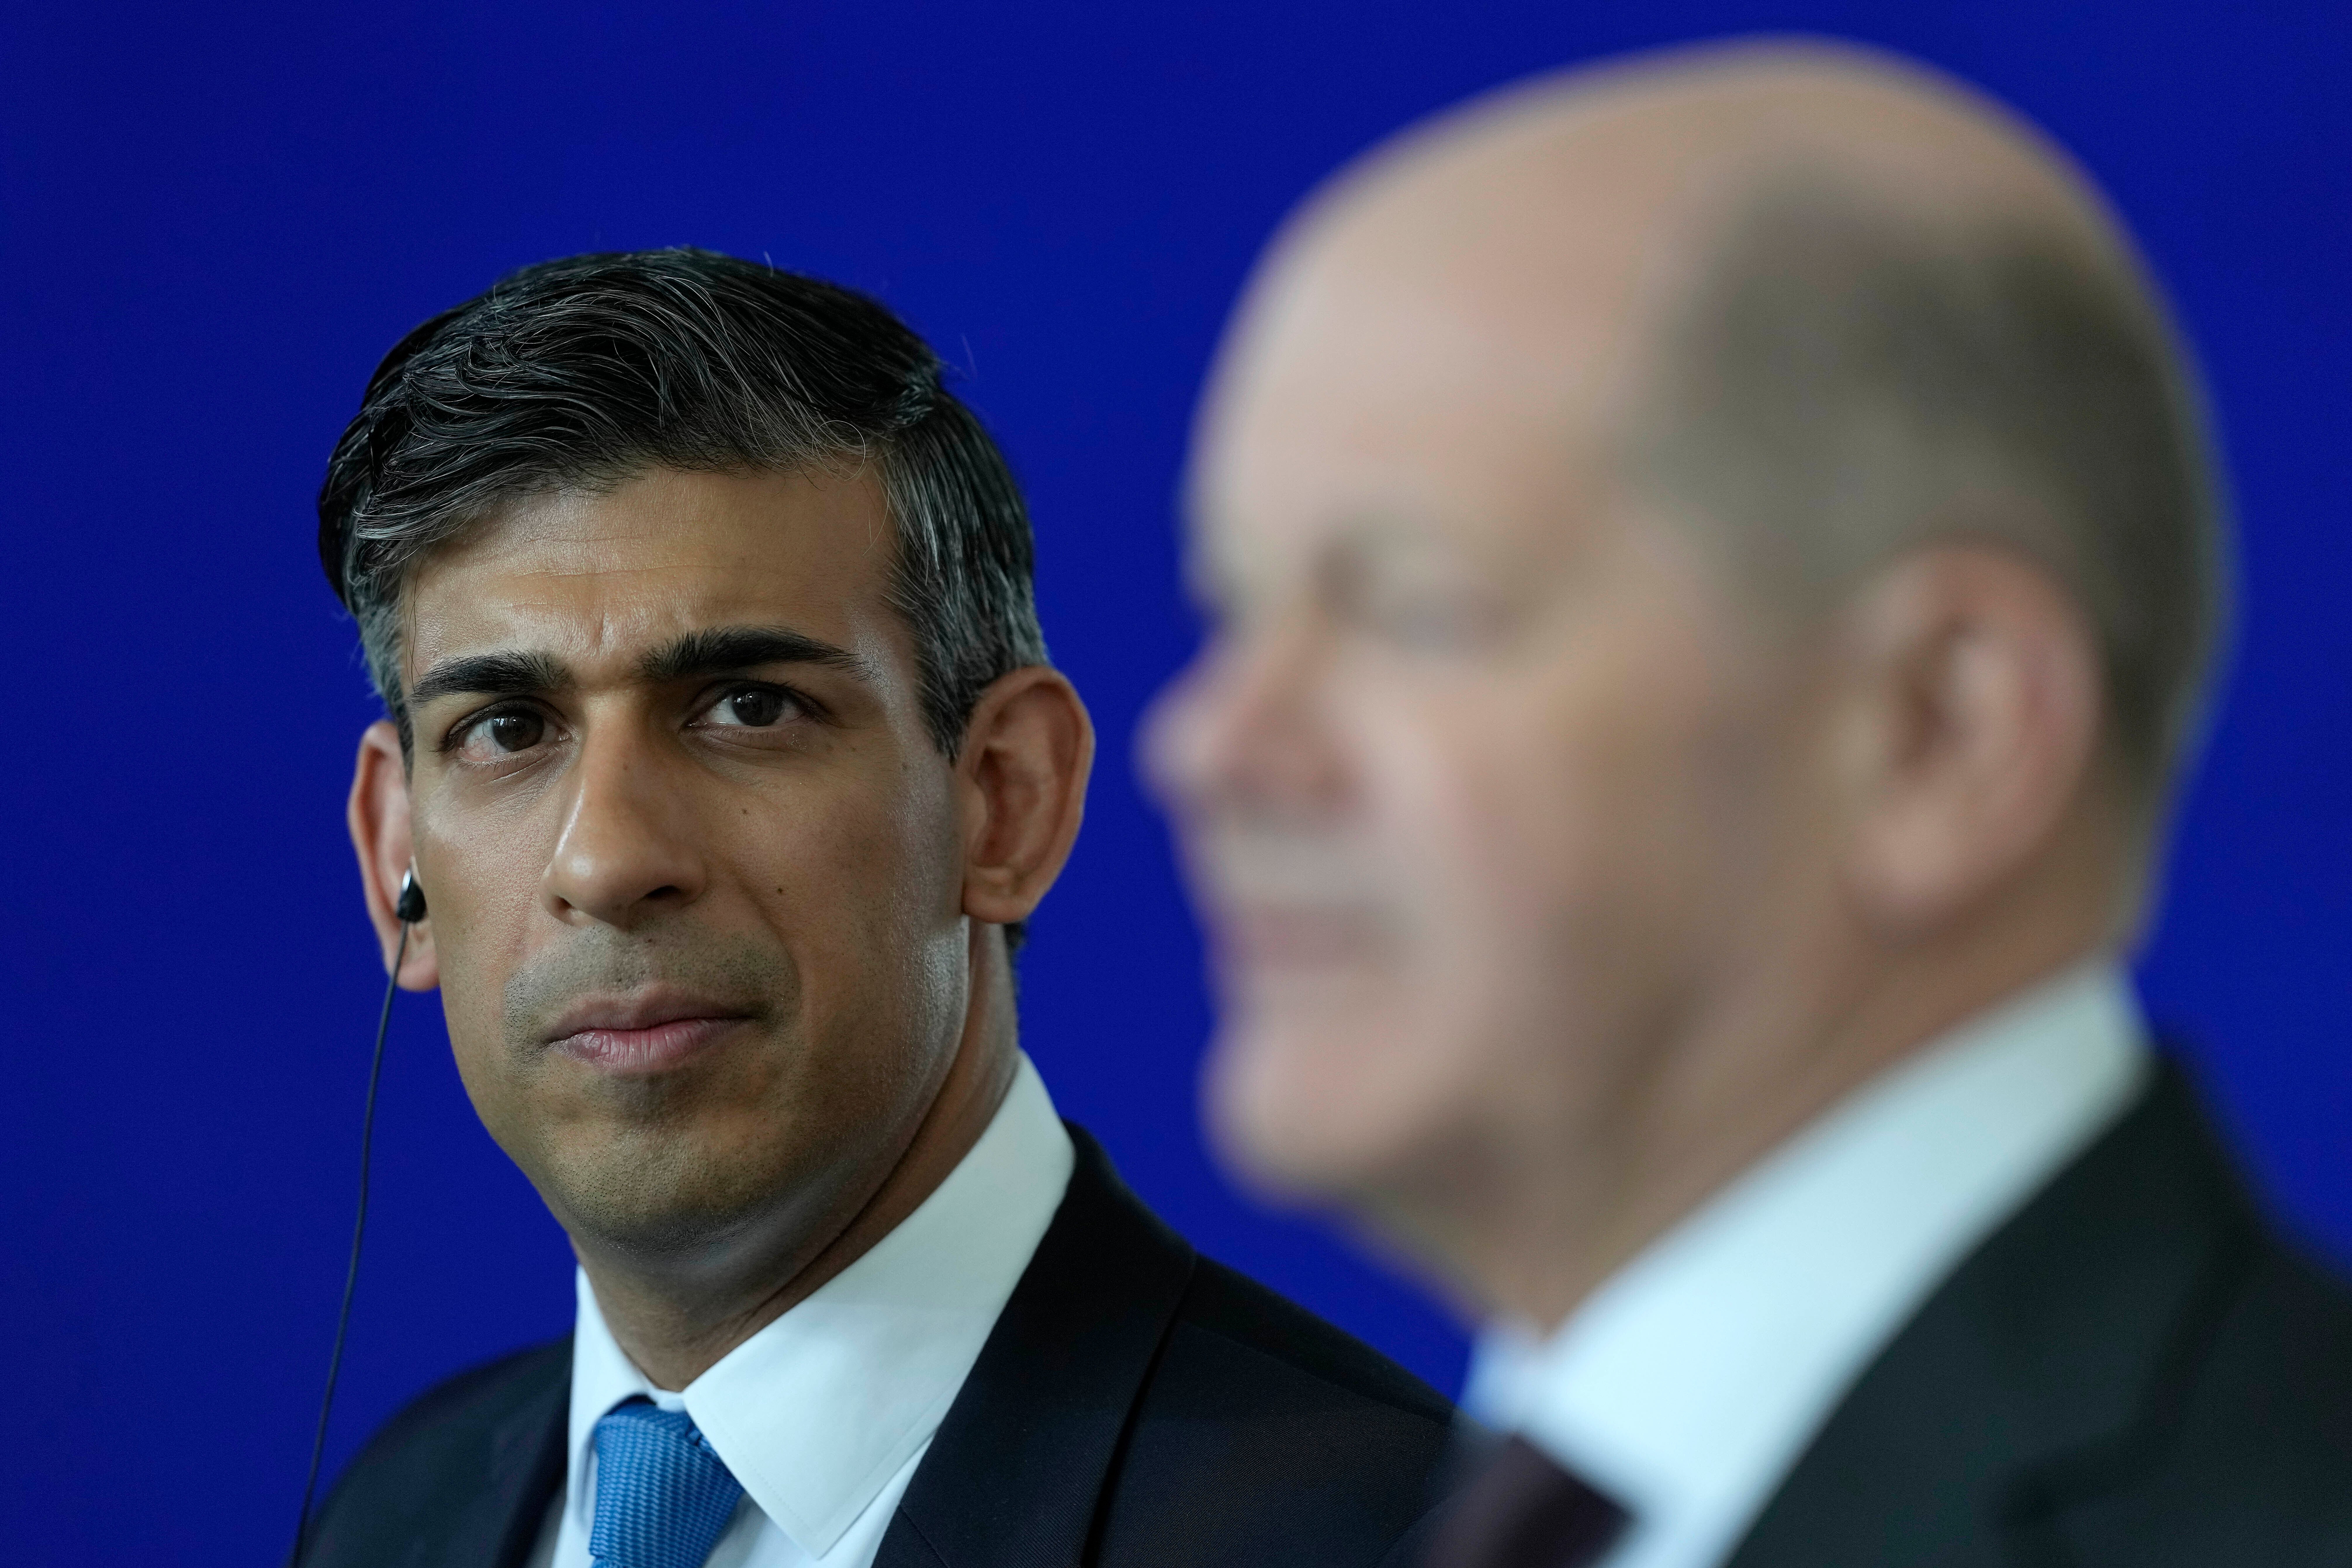 Wednesday’s meeting between Rishi Sunak and his German counterpart, Olaf Scholz, was overshadowed by a diplomatic gaffe